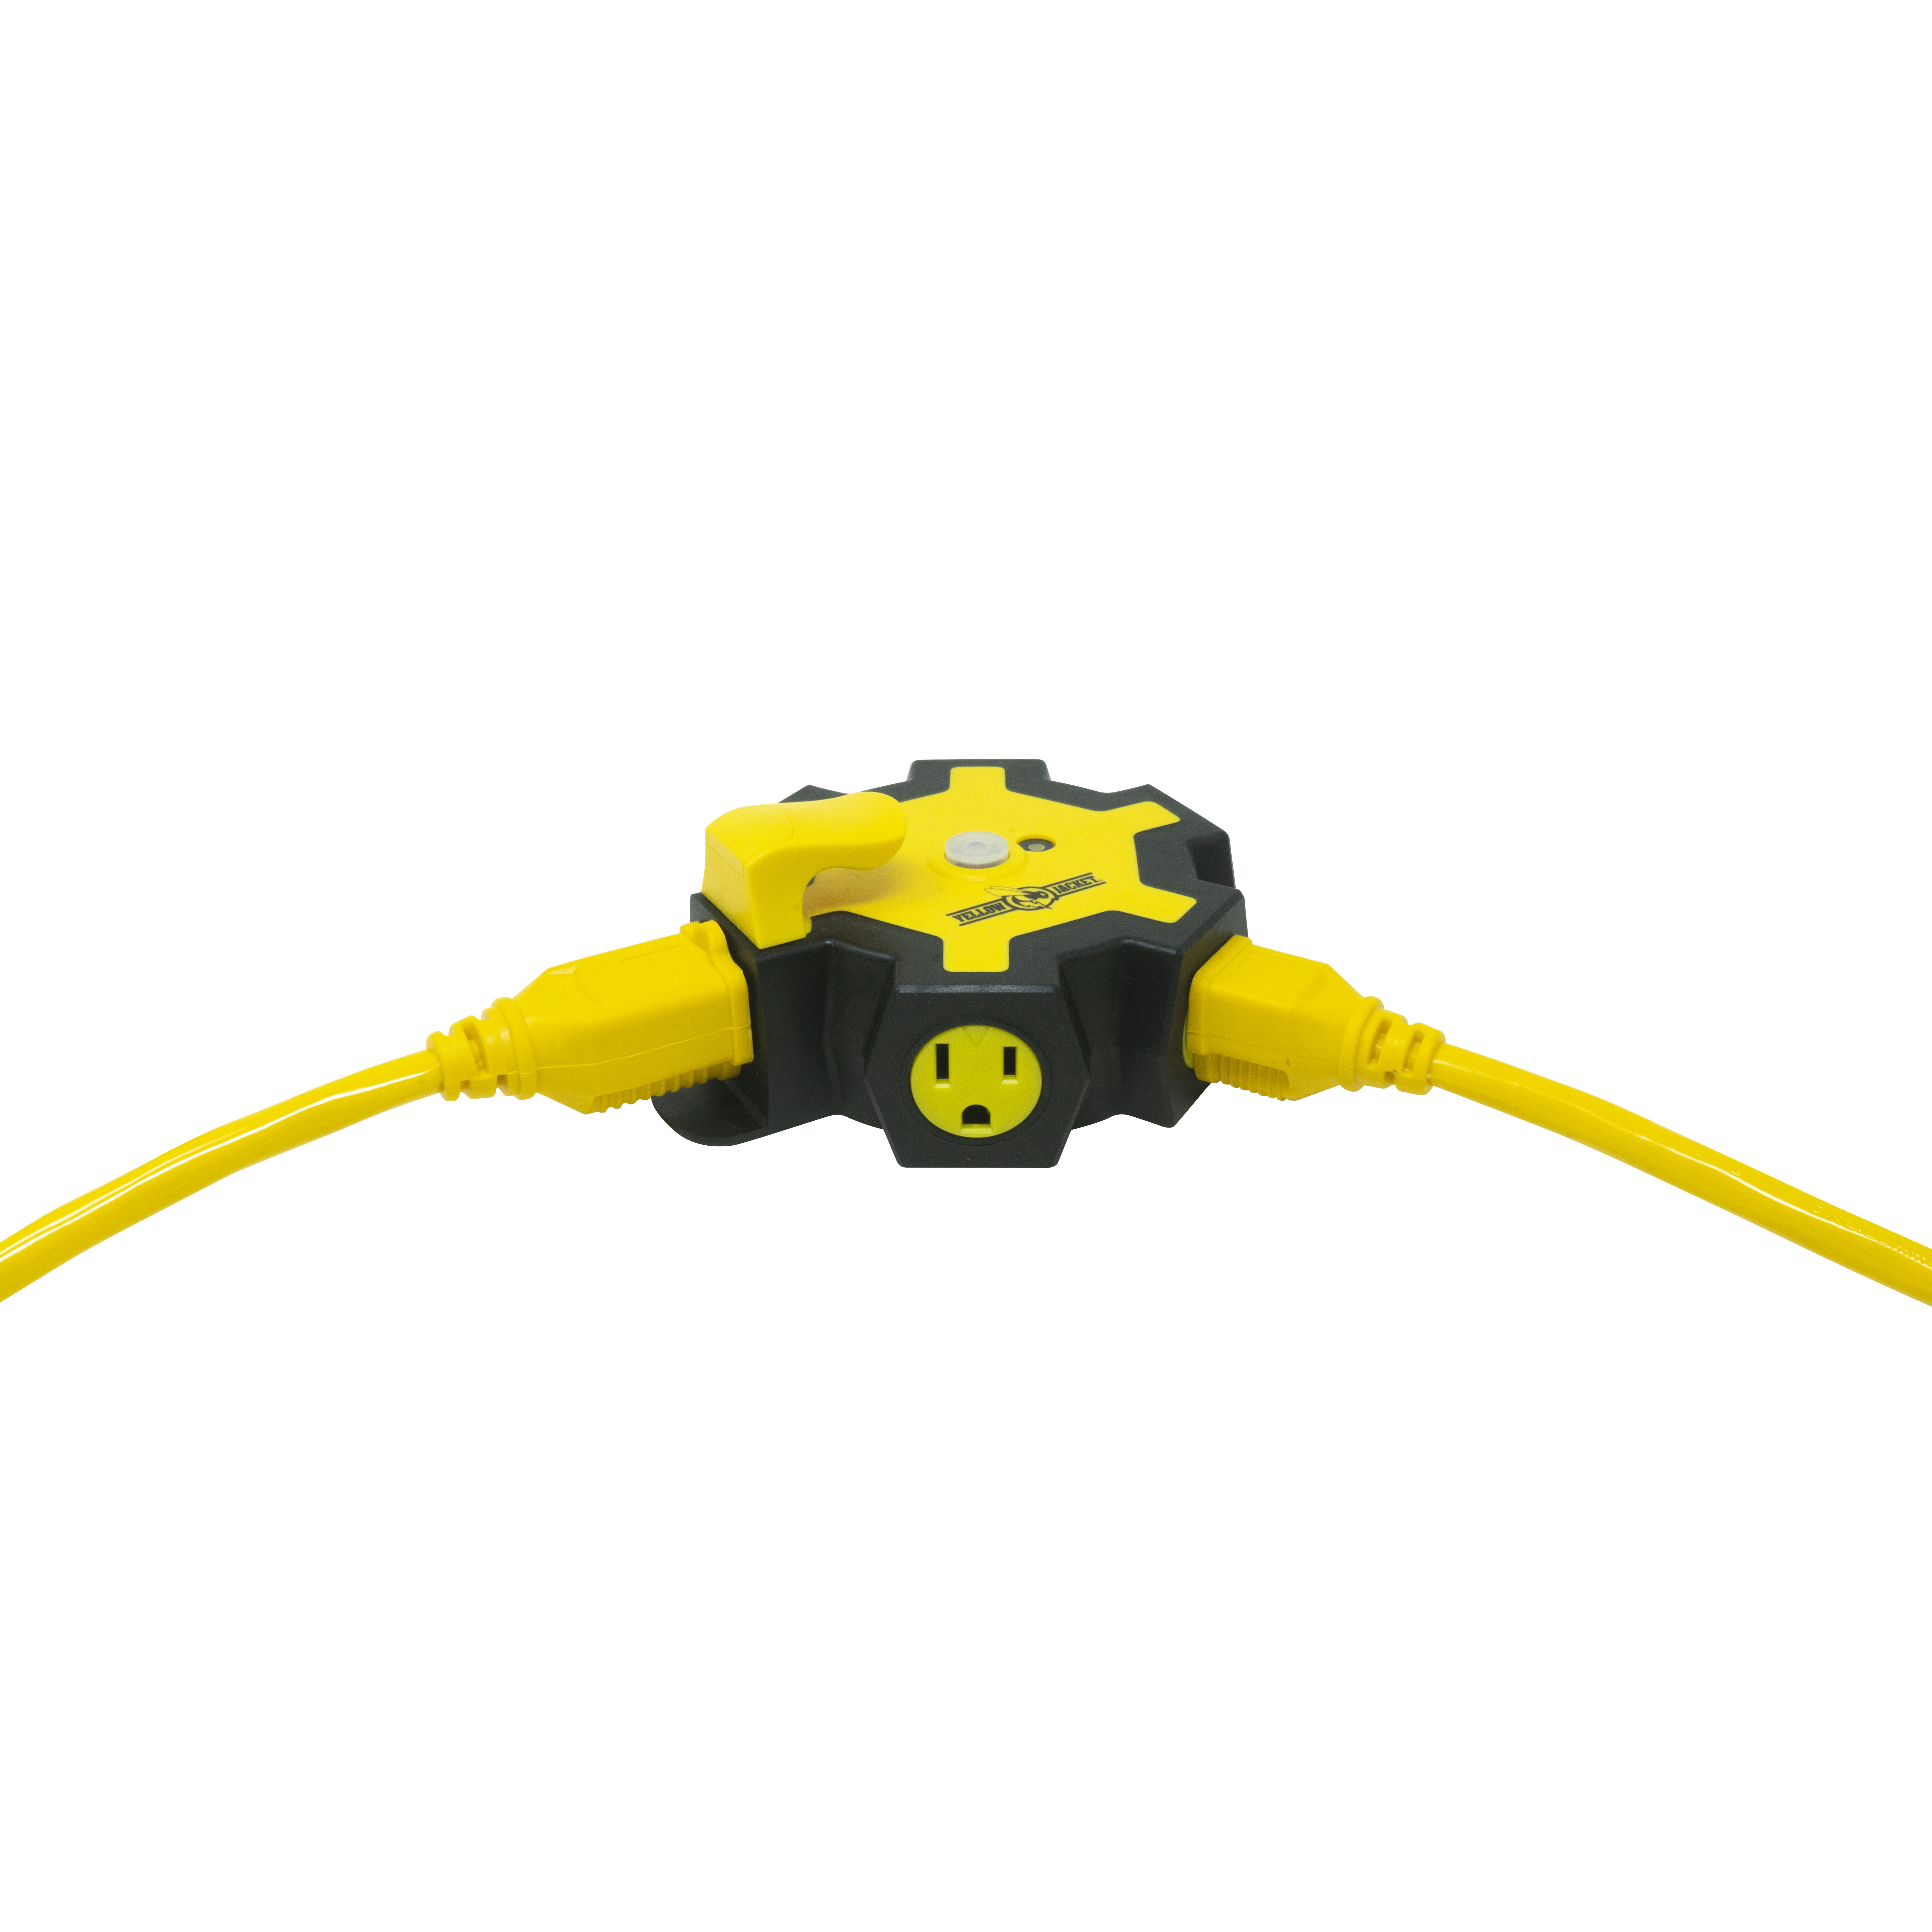 Yellow Jacket Extension Cord